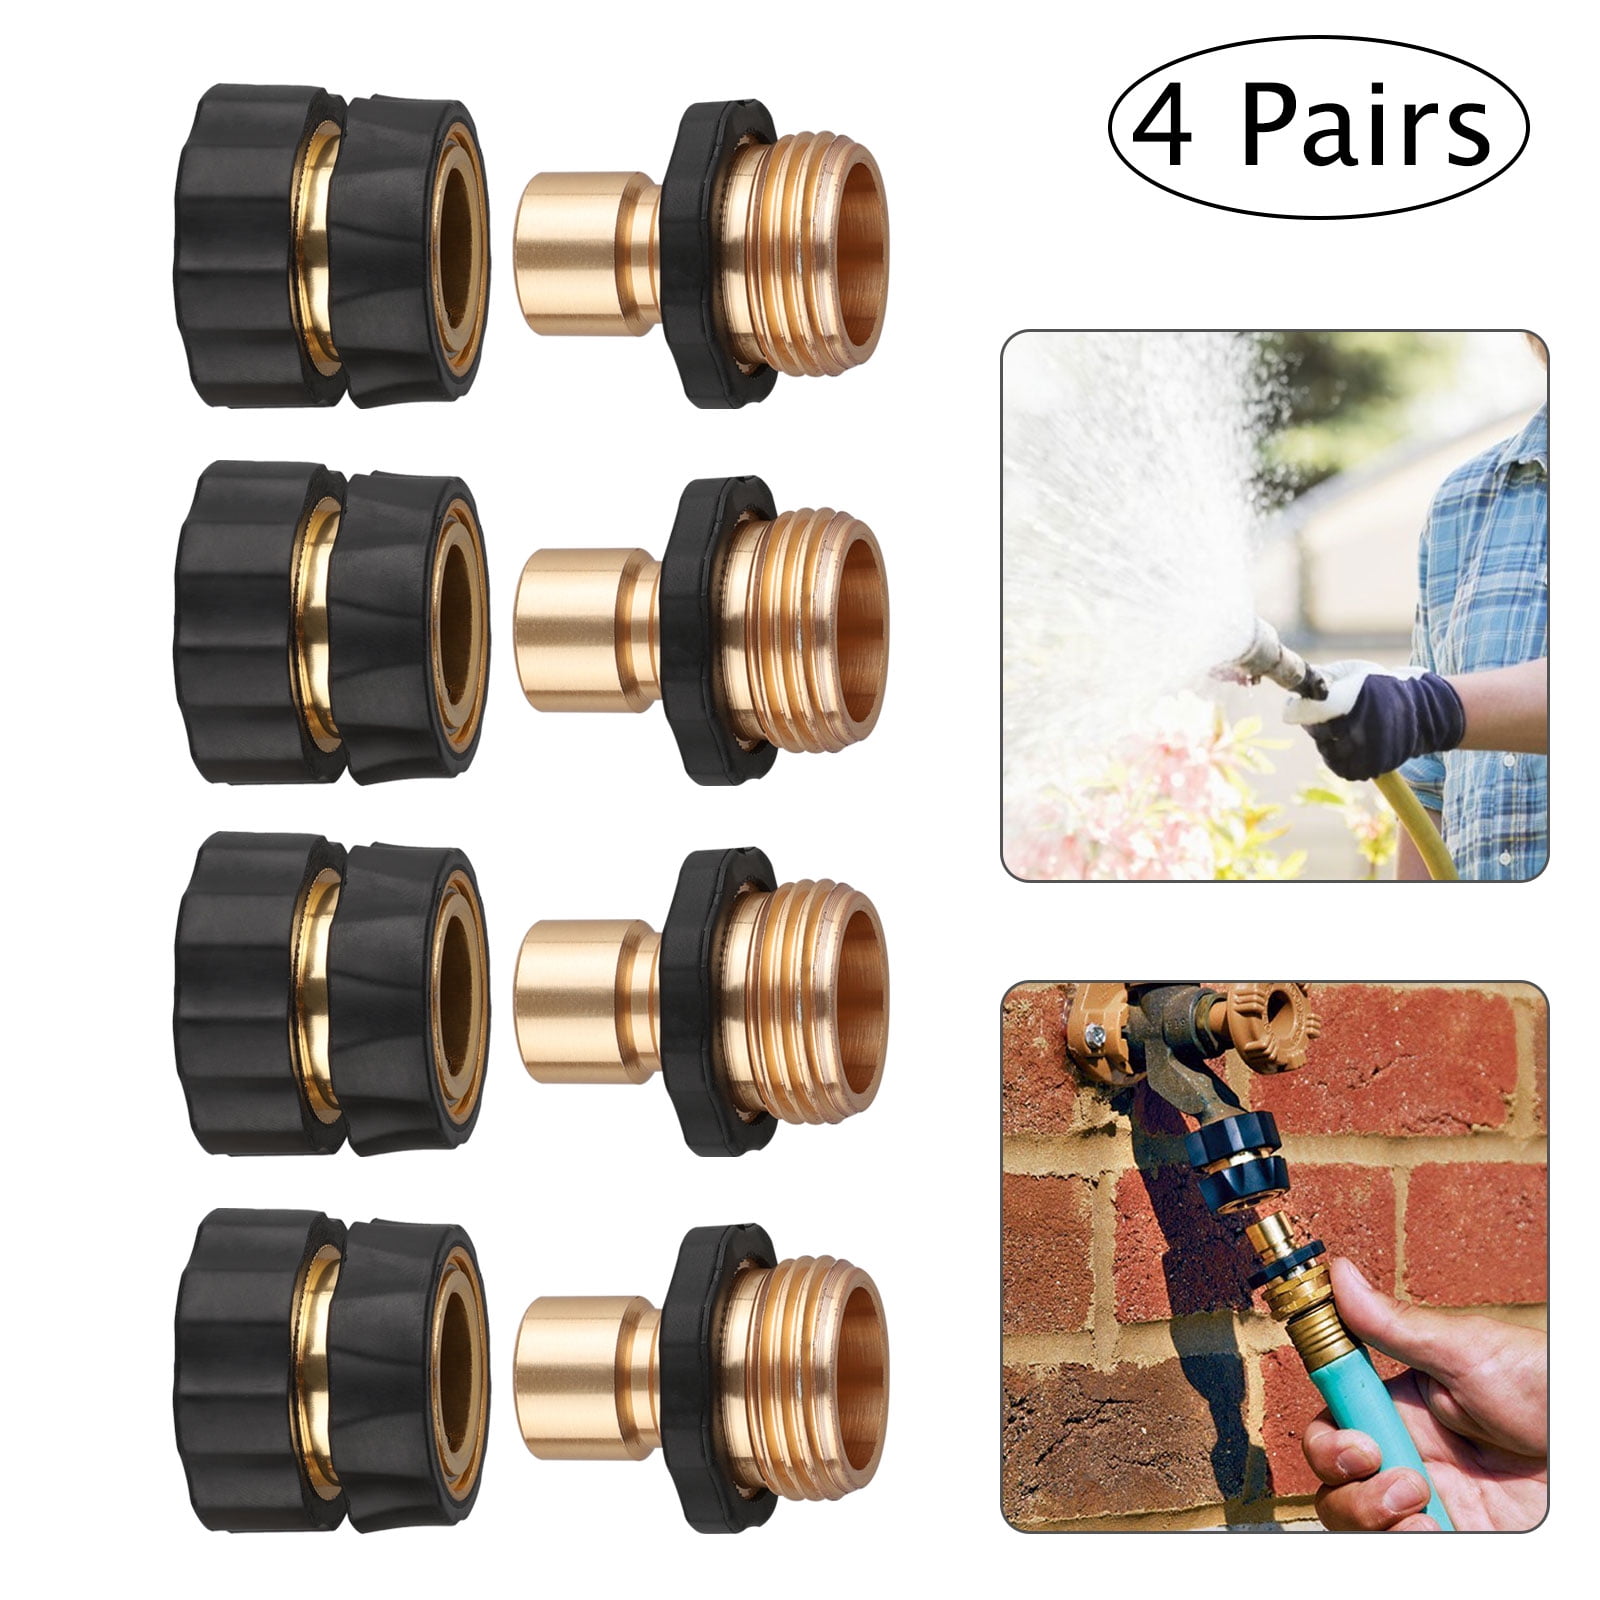 No-Leaks Water Hoses Quick Connect Release 3/4 Inch Garden Aluminum Hose Fitting Quick Connector Male and Female Value Pack 6 Set with 6 Sealed O-Rings